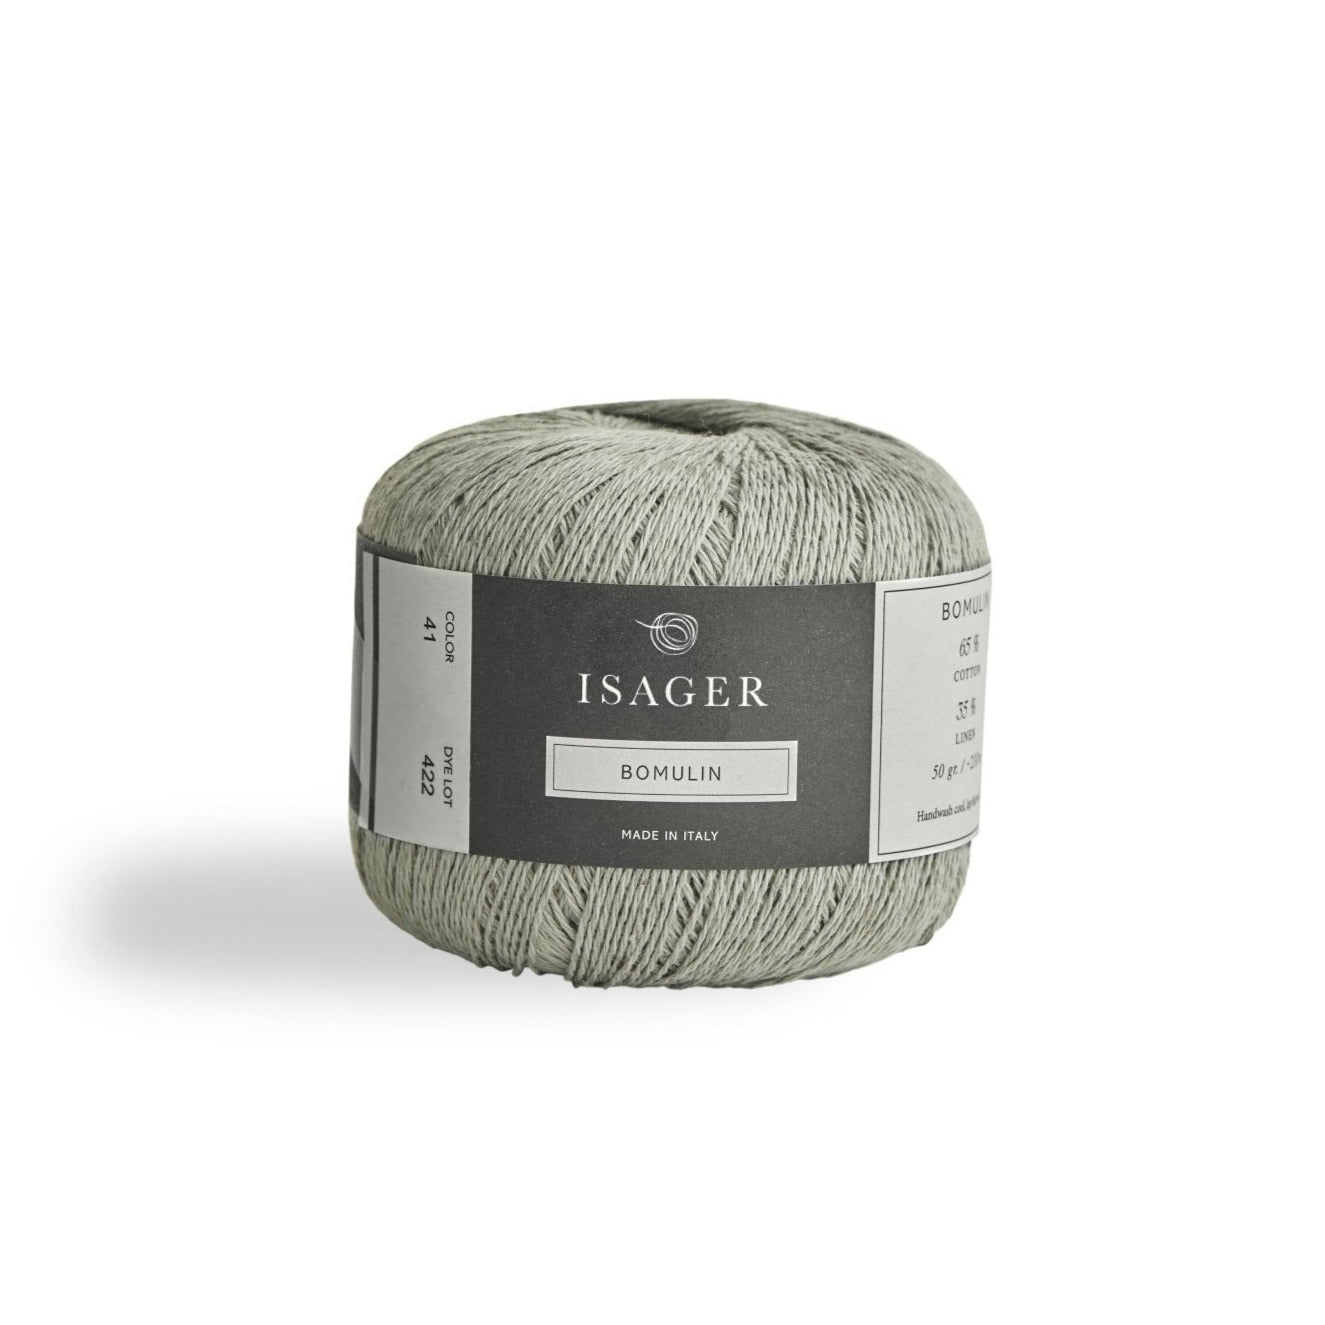 Isager Bomulin - 41 - 3 Ply - Cotton - The Little Yarn Store